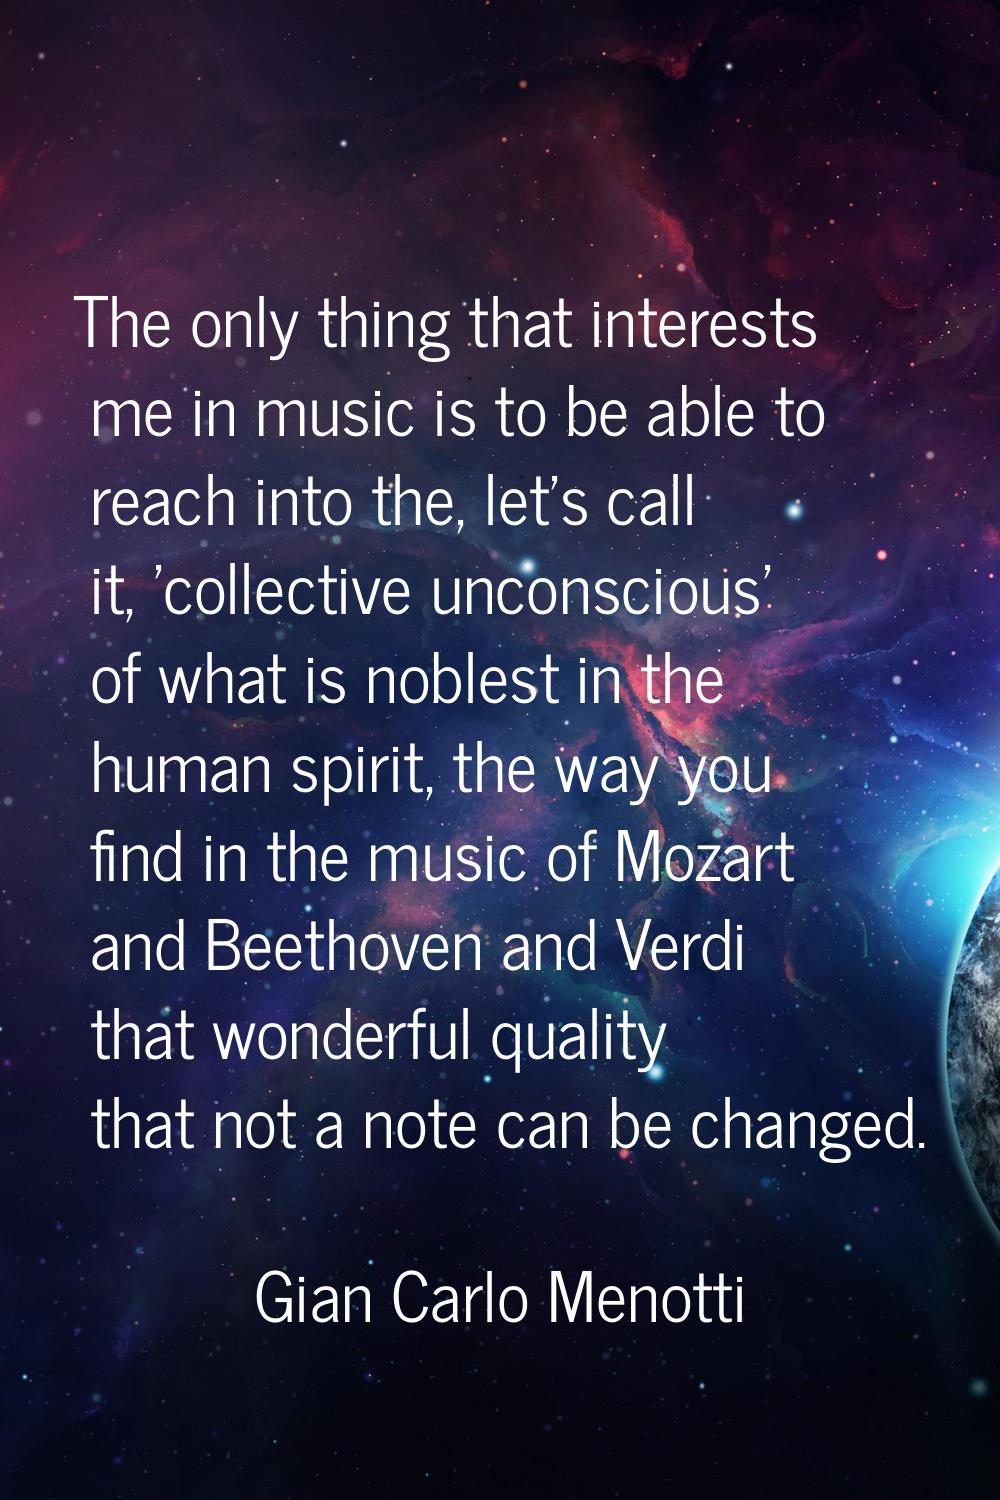 The only thing that interests me in music is to be able to reach into the, let's call it, 'collecti